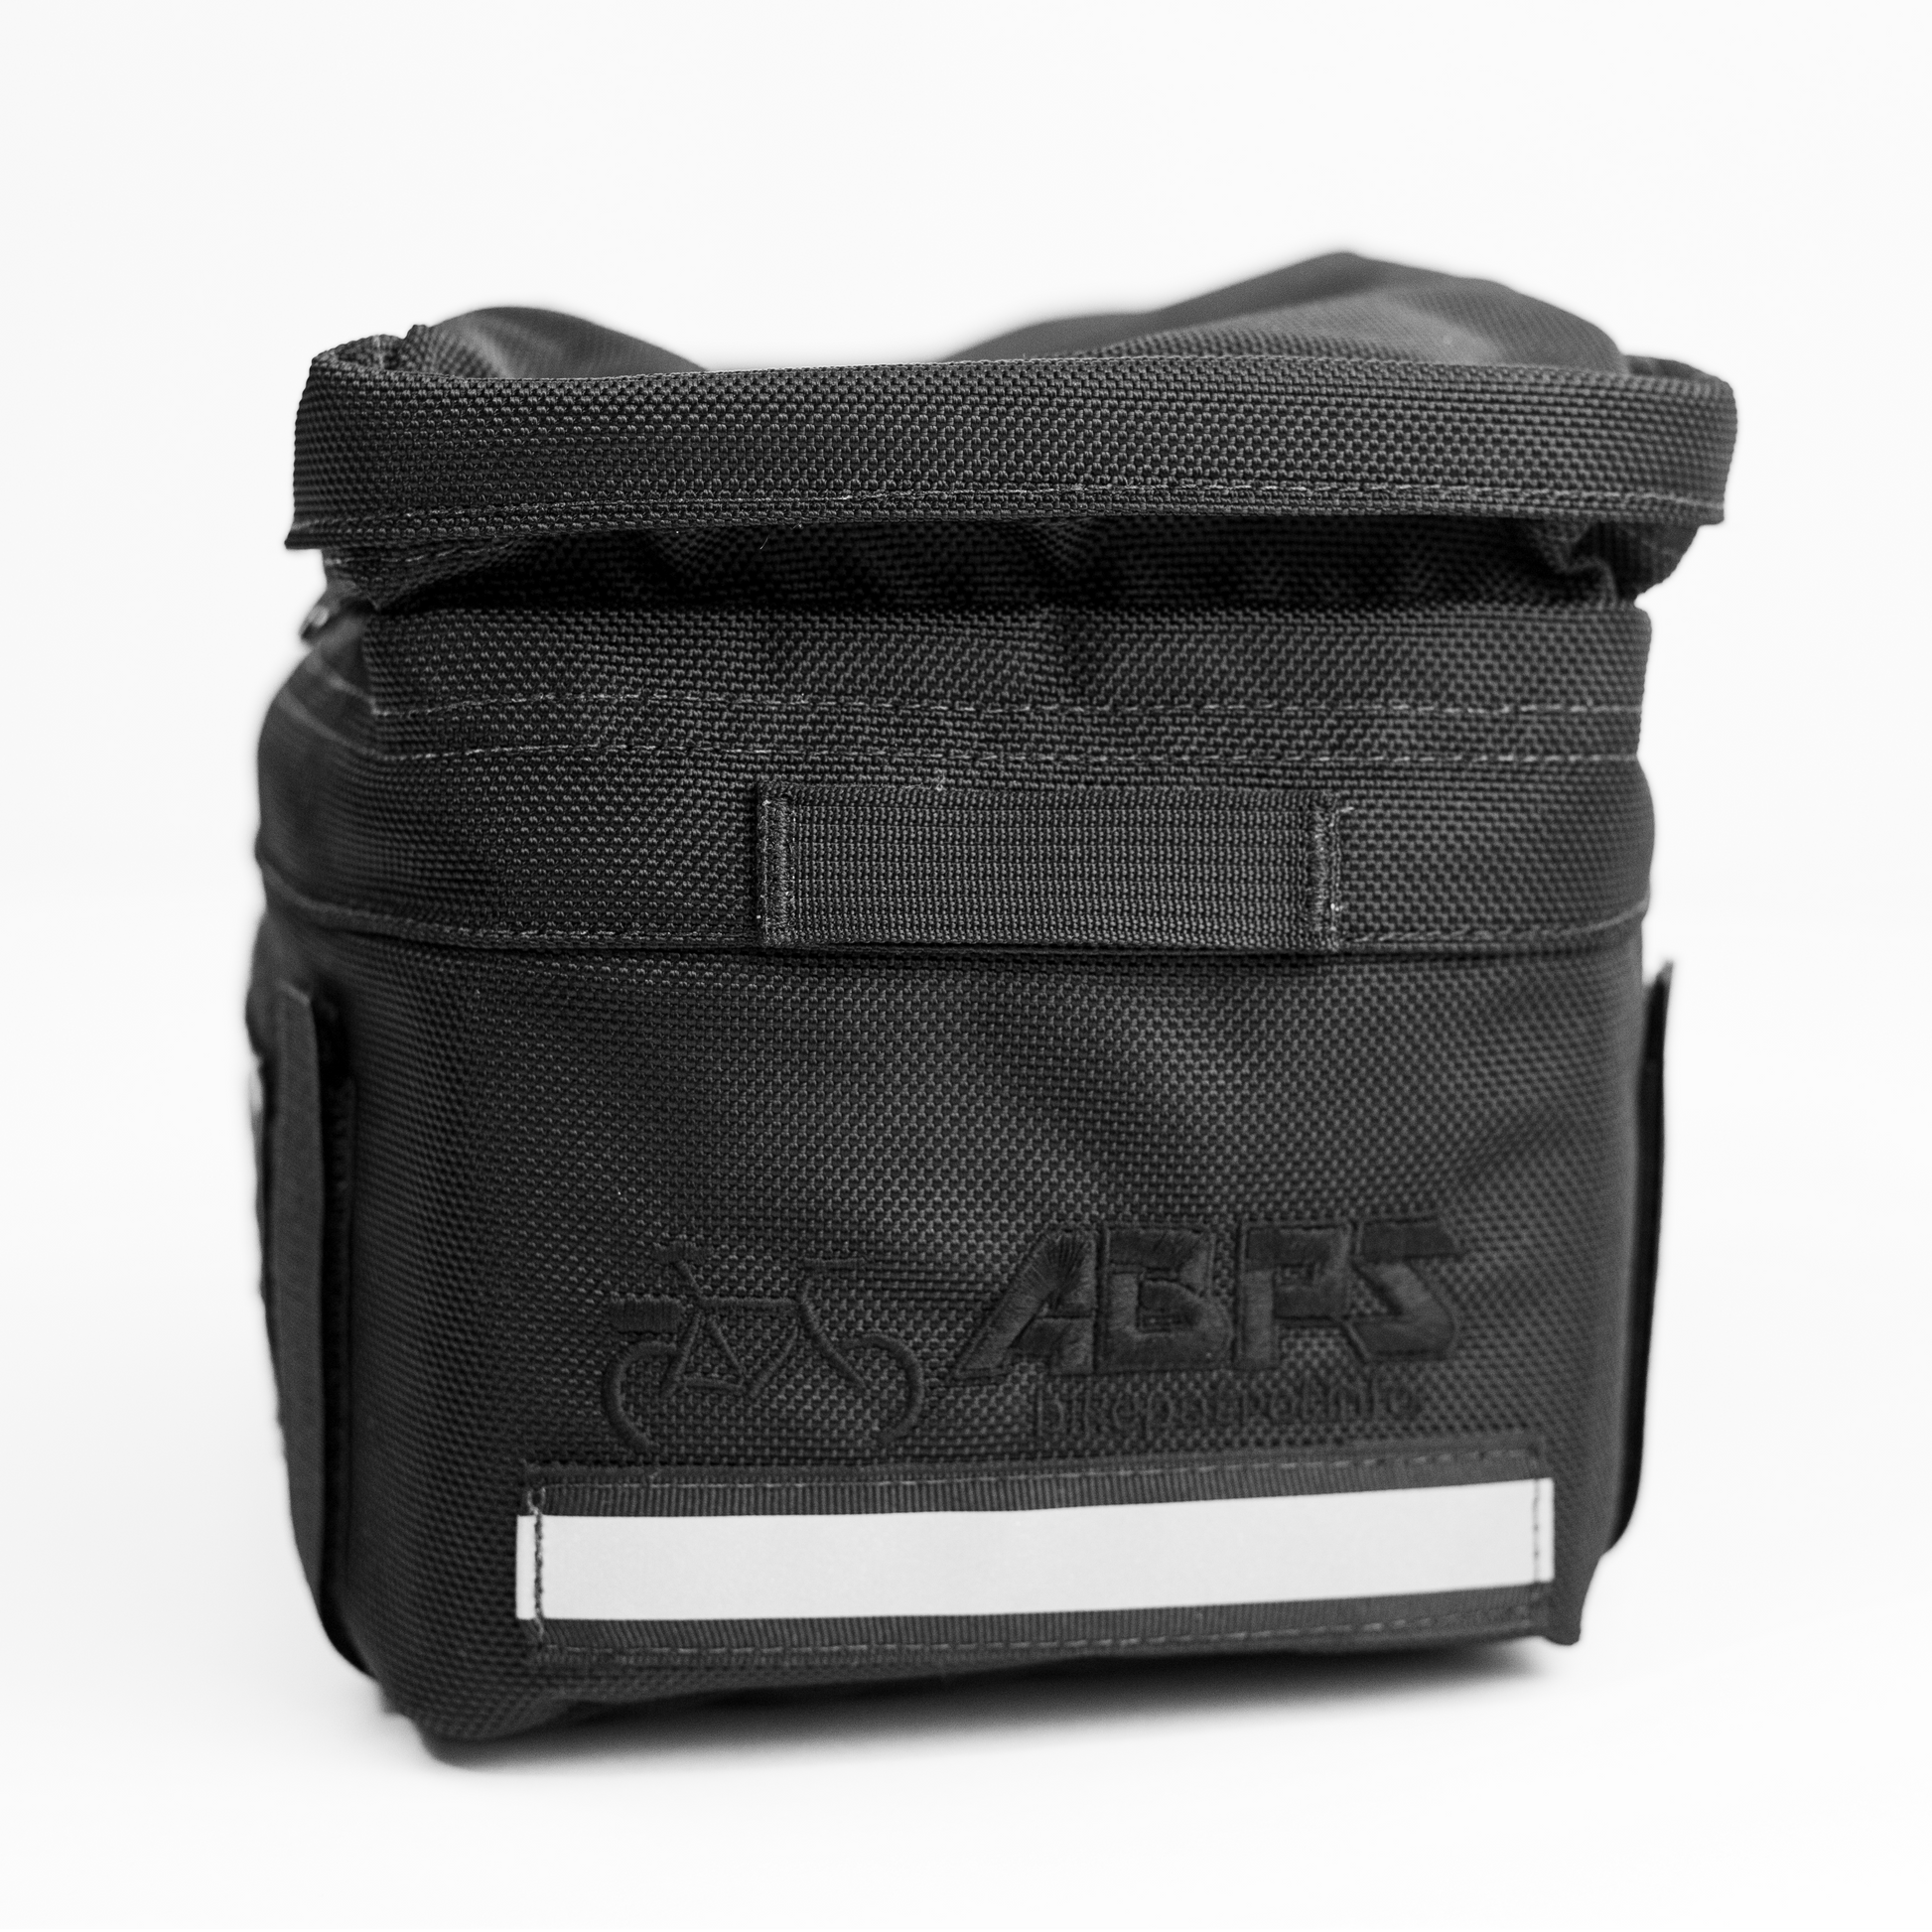 Front view of the Rear Trunk Bag with the ABPS logo and a reflective strip.